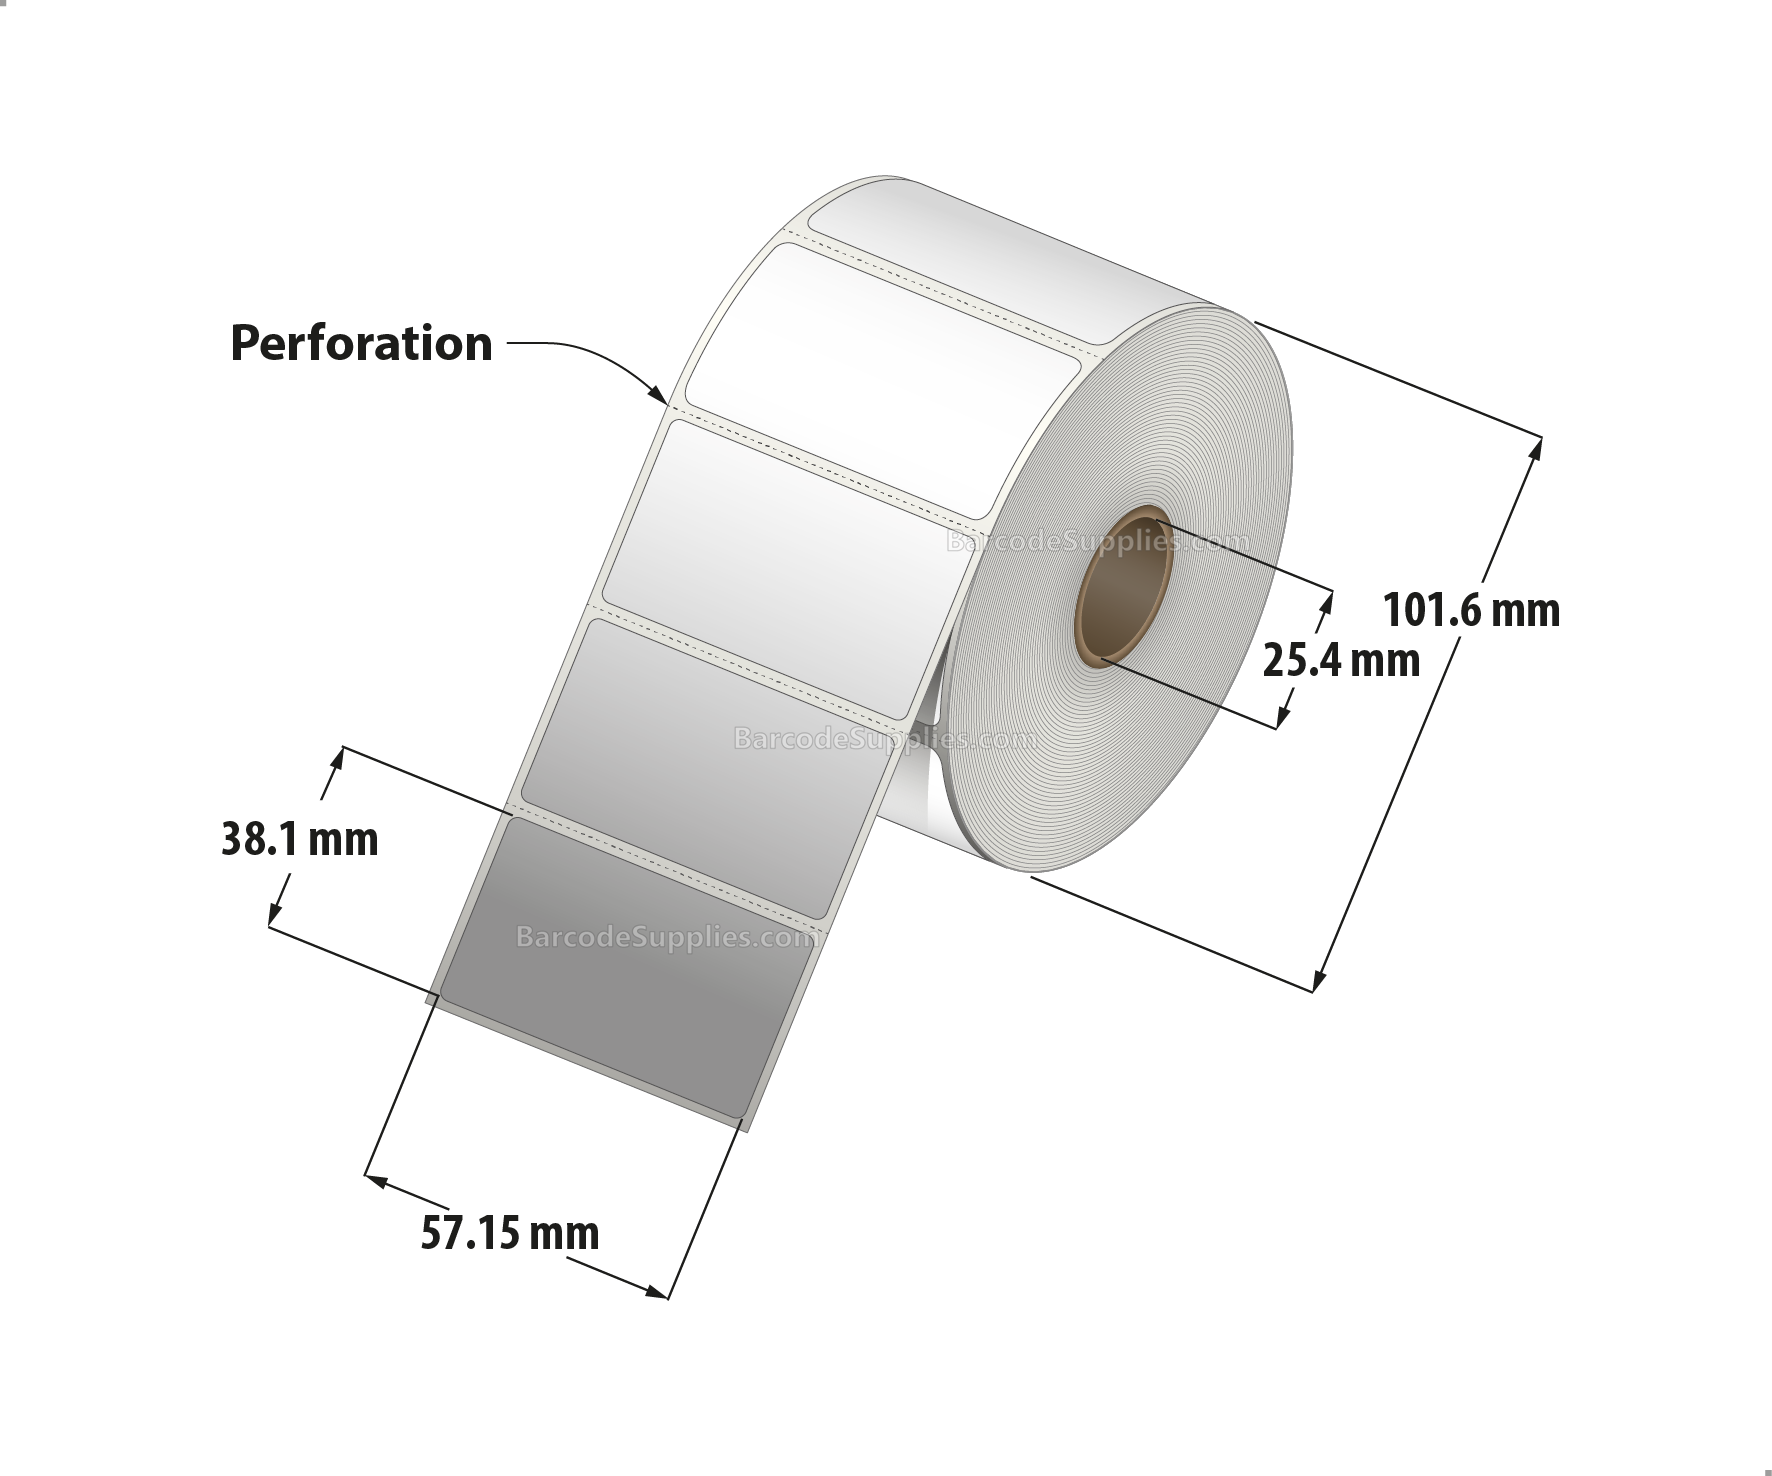 2.5 x 1.5 Direct Thermal White Labels With Acrylic Adhesive - Perforated - 960 Labels Per Roll - Carton Of 12 Rolls - 11520 Labels Total - MPN: RD-25-15-960-1